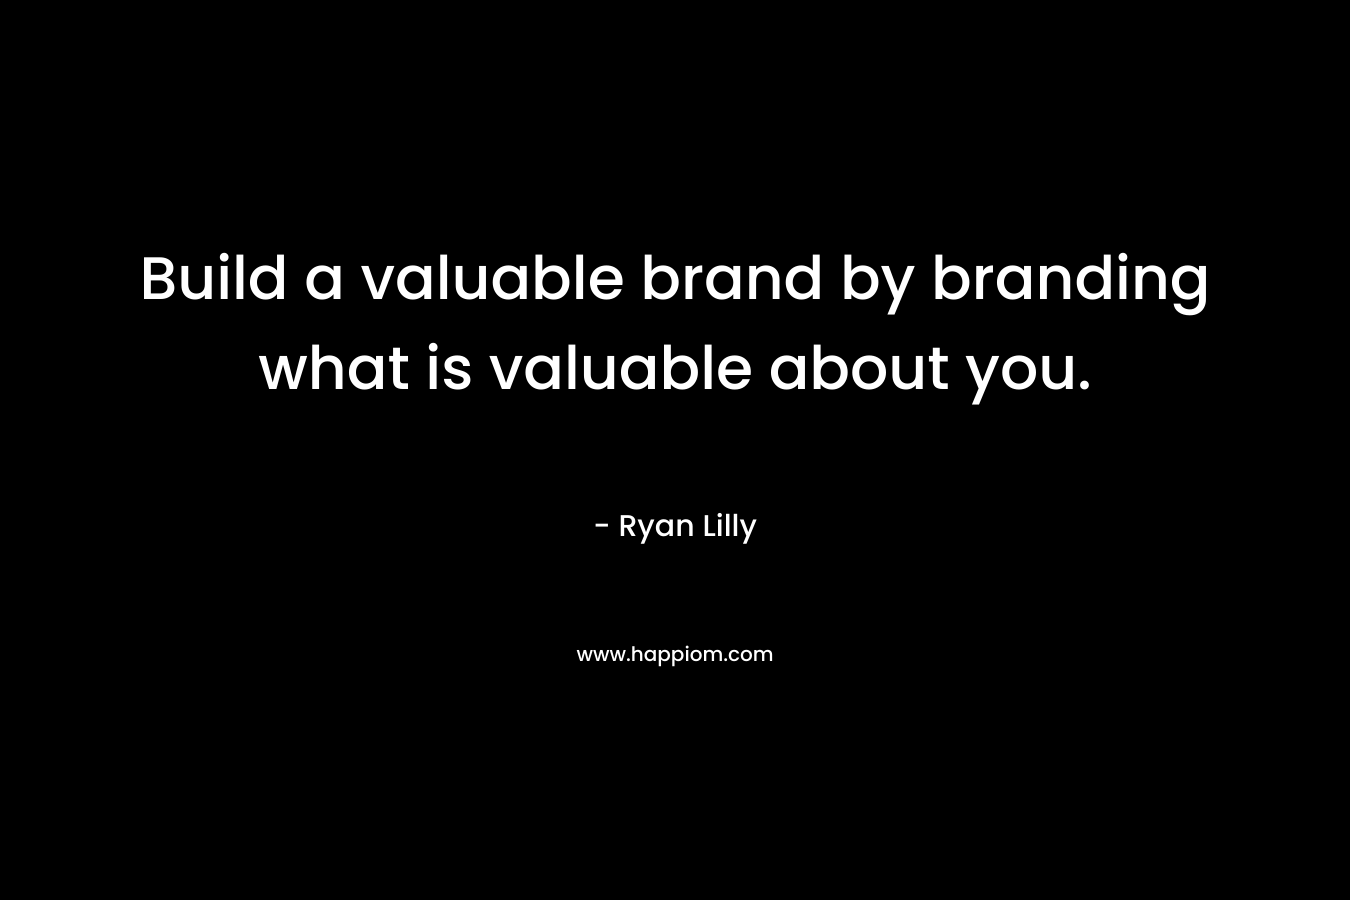 Build a valuable brand by branding what is valuable about you.